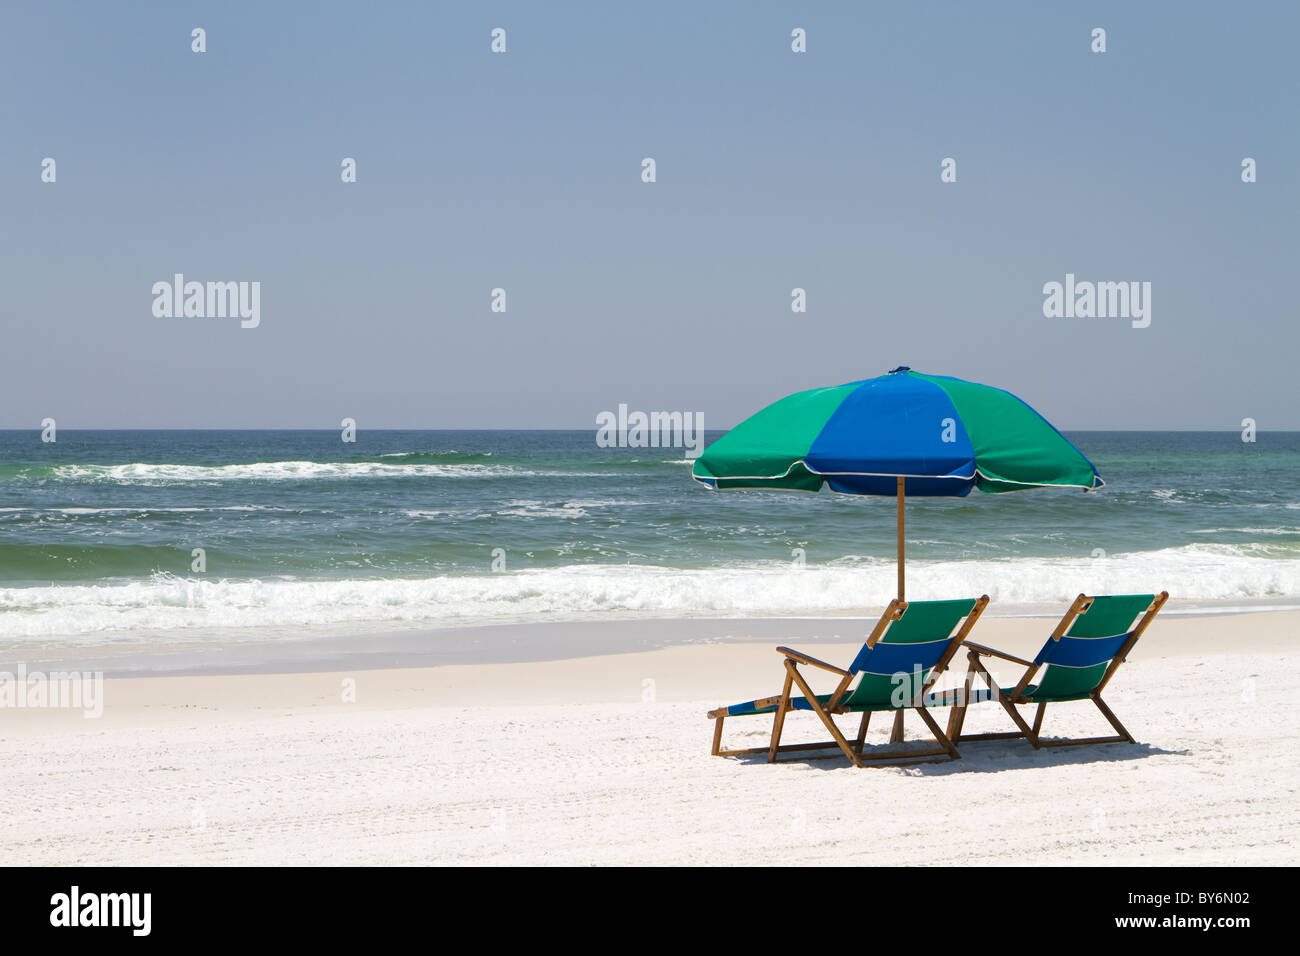 Two beach chairs and an umbrella sit on the sand at Fort Walton Beach, Florida. Stock Photo